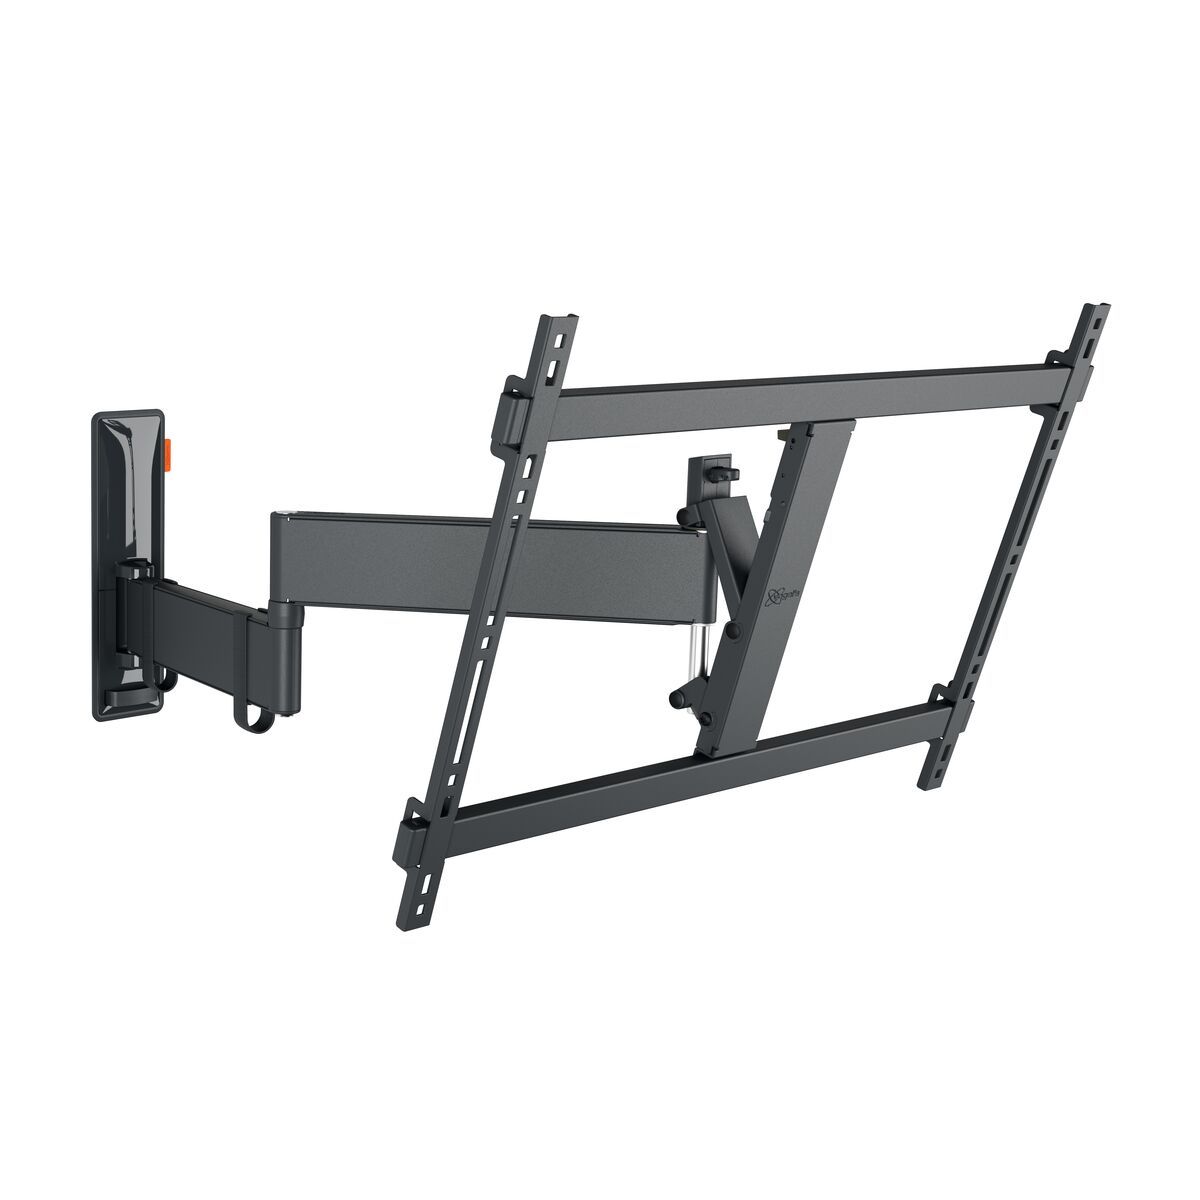 Vogel's TVM 3645 Full-Motion TV Wall Mount (black) - Suitable for 40 up to 77 inch TVs - Full motion (up to 180°) swivel - Tilt up to 20° - Product